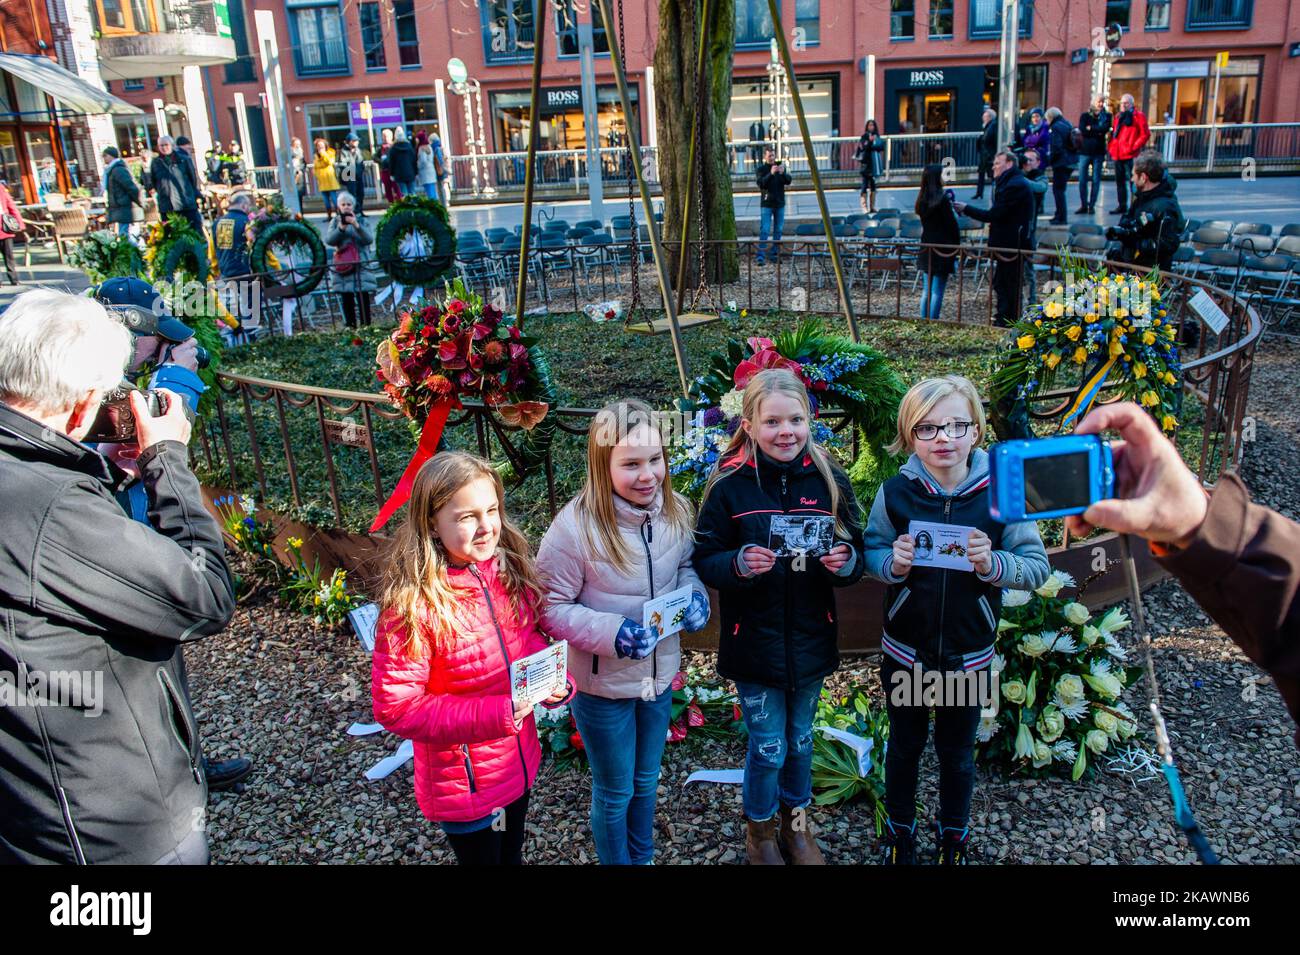 Children from the Montessori school with photos of the children victims during the annual commemoration of the bombing in Nijmegen, Netherlands, on 22 February 2018. he Bombing of Nijmegen was an unplanned bombing attack by American aircraft on the city of Nijmegen in the Netherlands on 22 February 1944. During this Allied mistake bombing, almost 800 people were killed and a large part of the city center of Nijmegen was destroyed. Every February 22nd an official commemoration has take place at the Raadhuishof, the location where the Montessori school was located, where 24 children and 8 sister Stock Photo